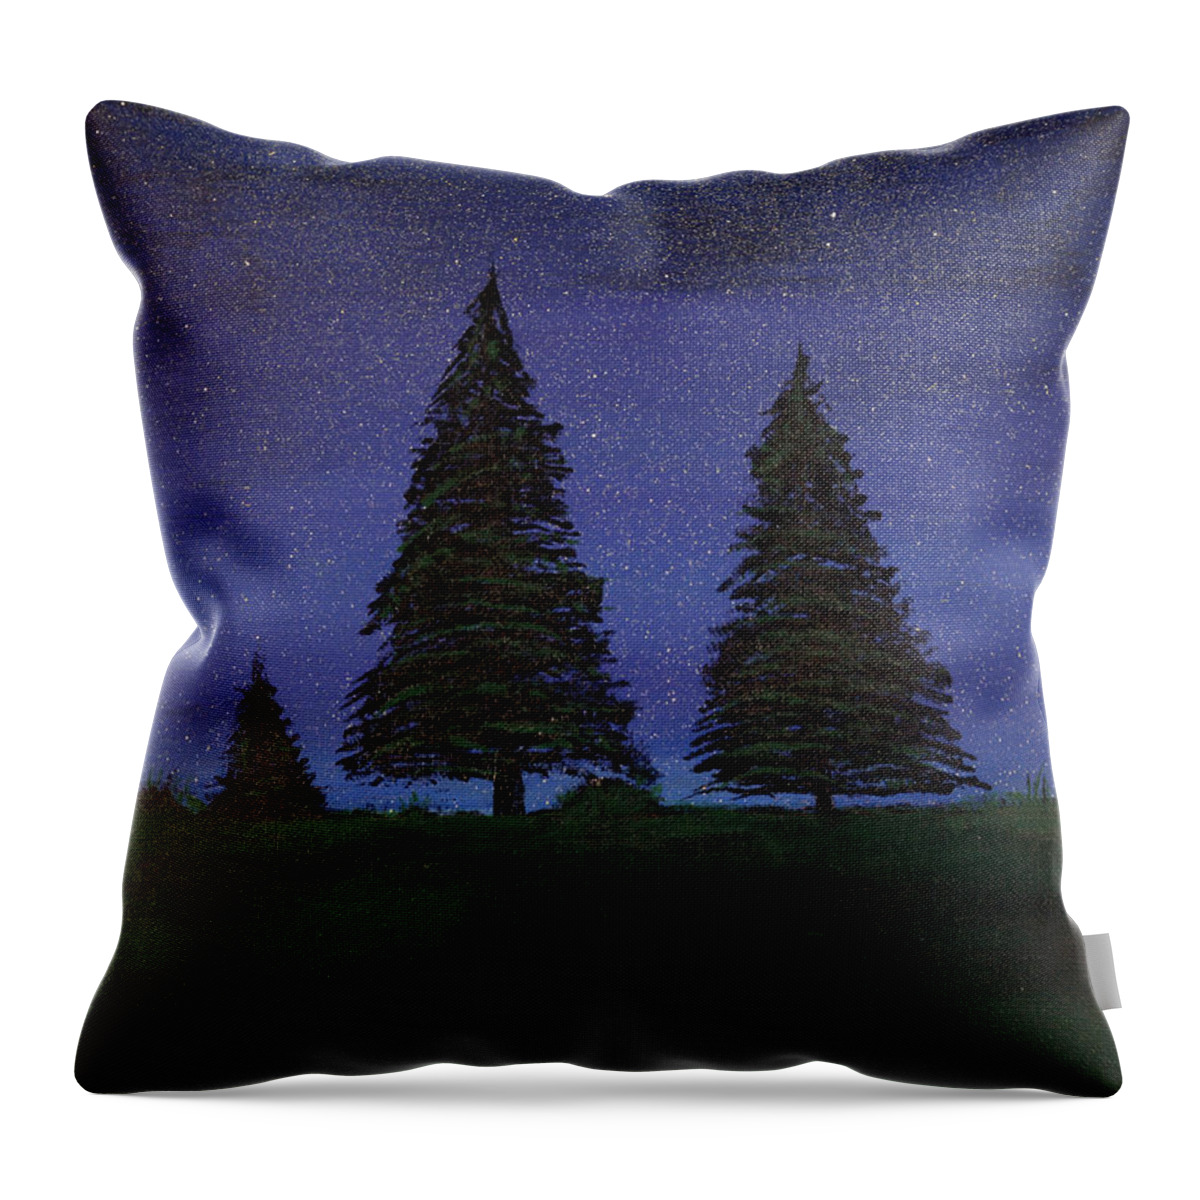 Nighttime Throw Pillow featuring the painting Nighttime by David Stasiak